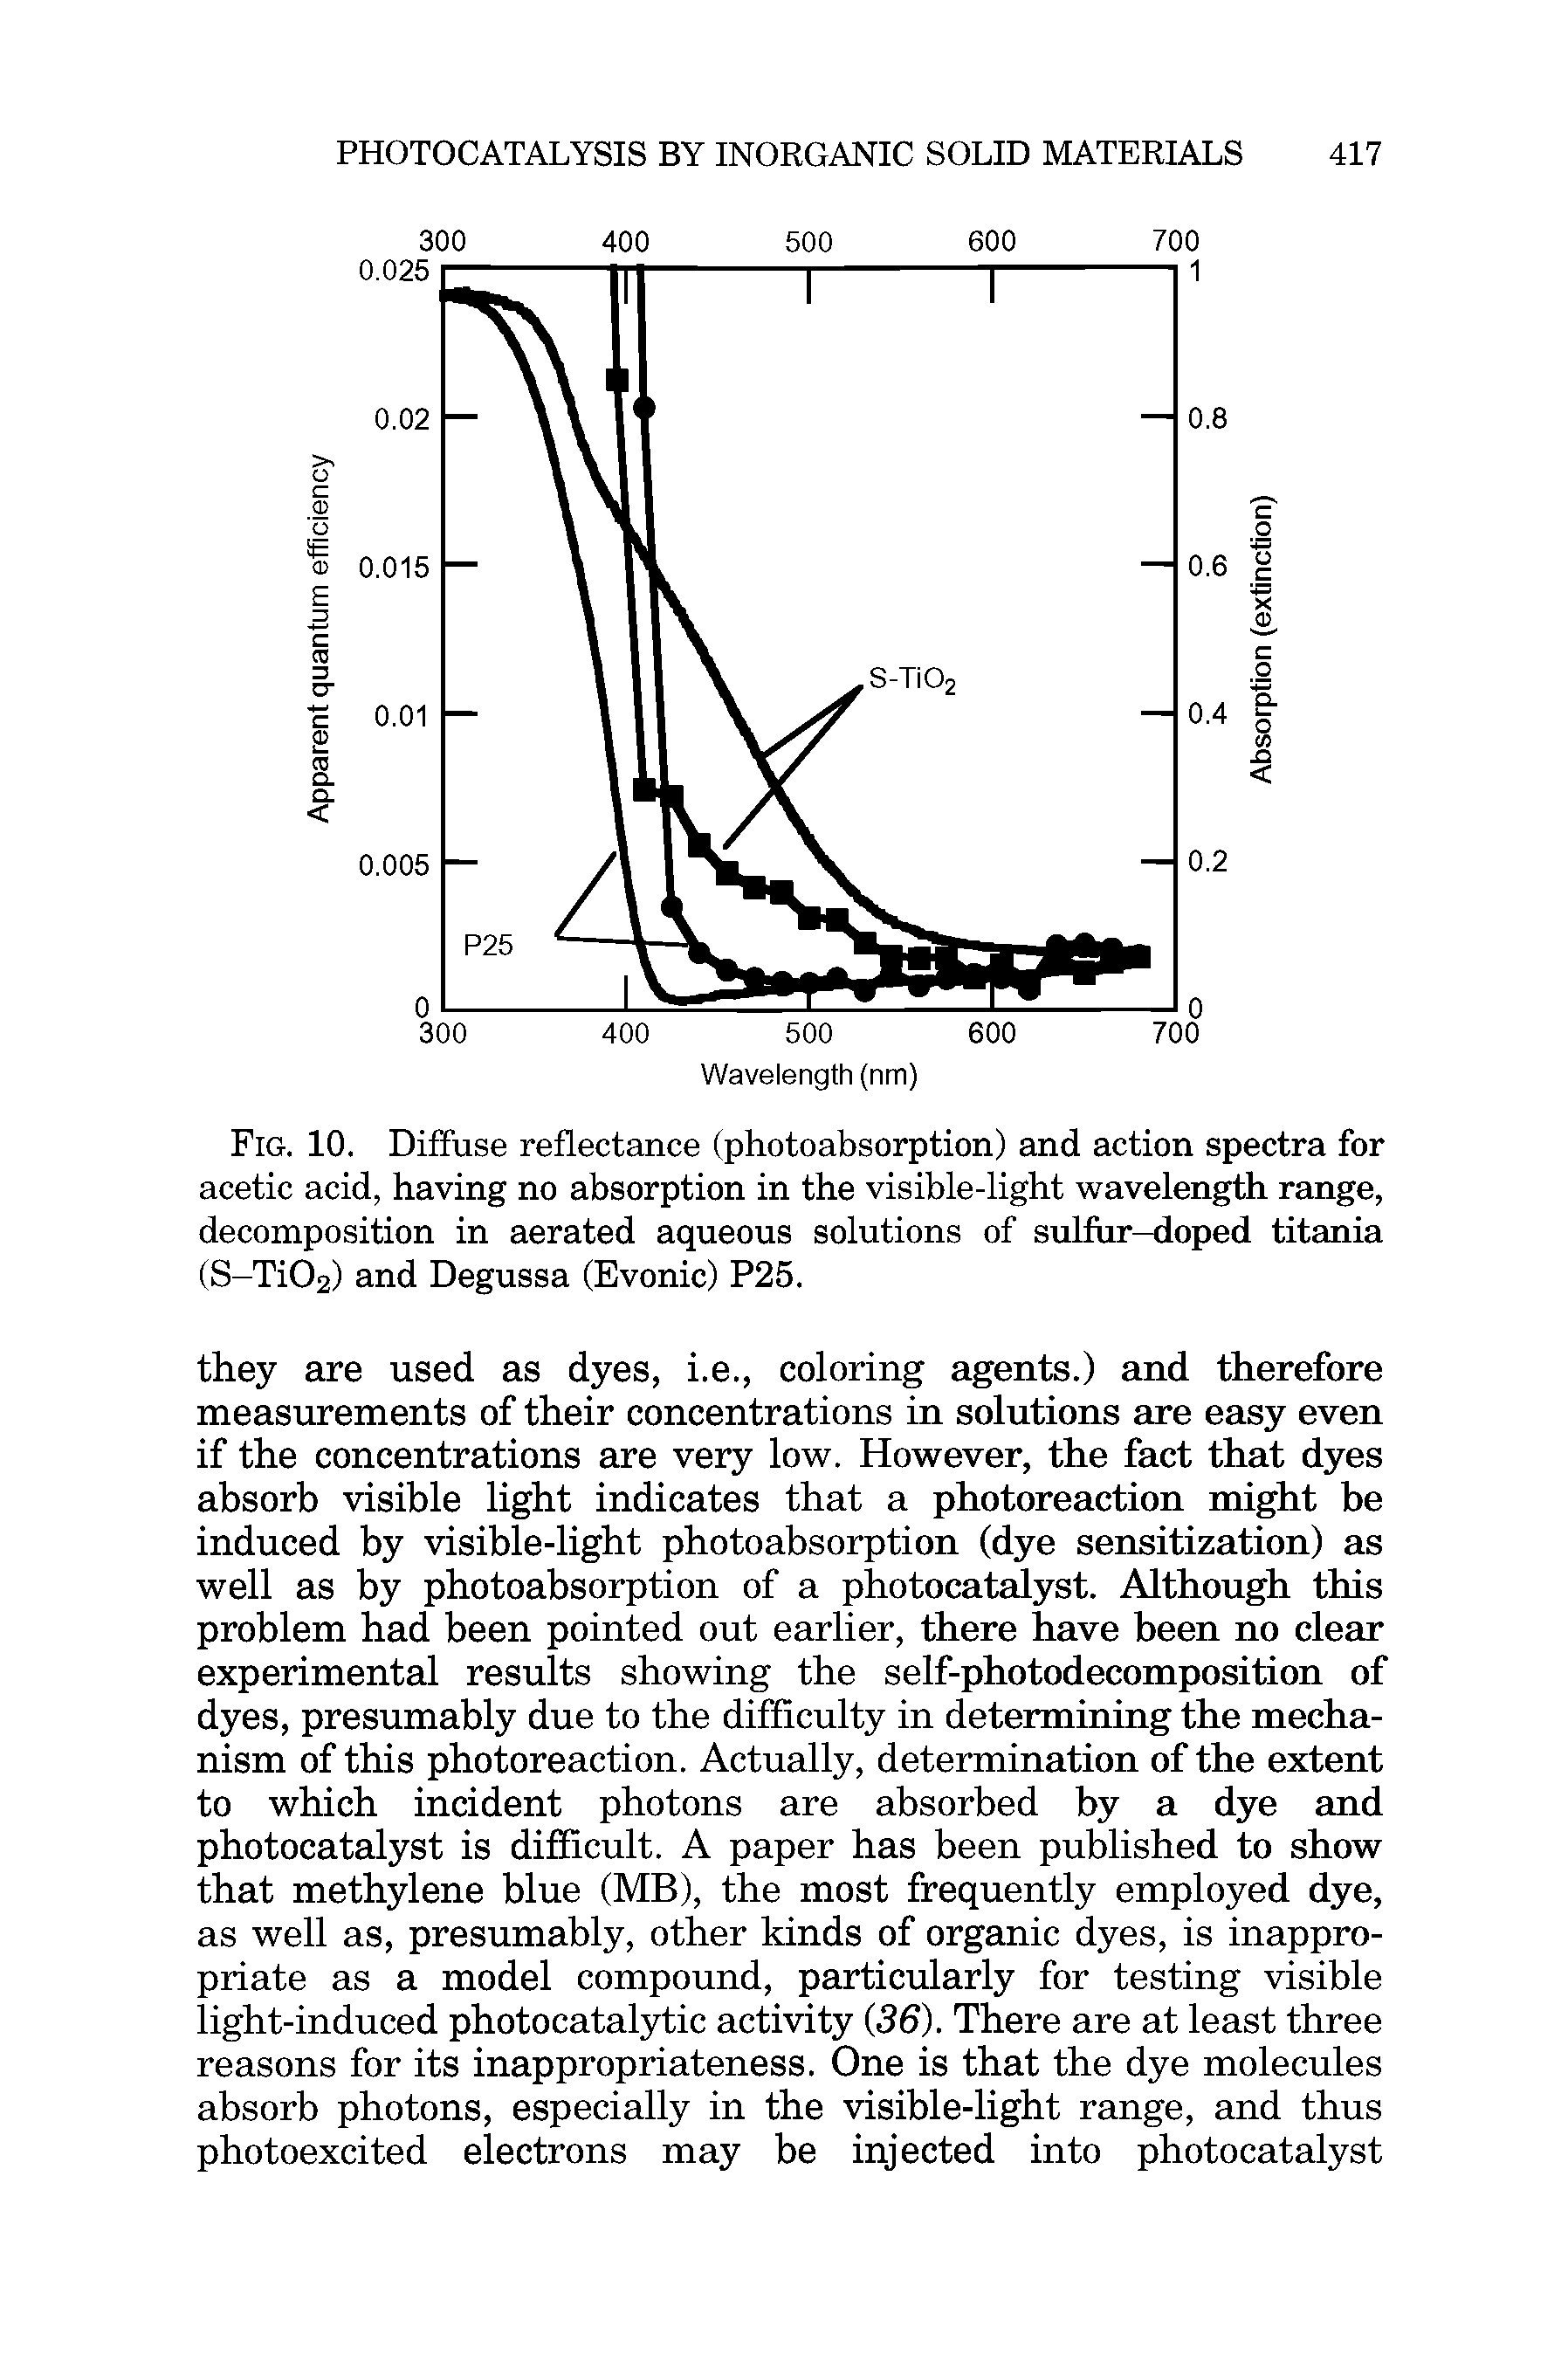 Fig. 10. Diffuse reflectance (photoabsorption) and action spectra for acetic acid, having no absorption in the visible-light wavelength range, decomposition in aerated aqueous solutions of sulfur-doped titania (S-TiOz) and Degussa (Evonic) P25.